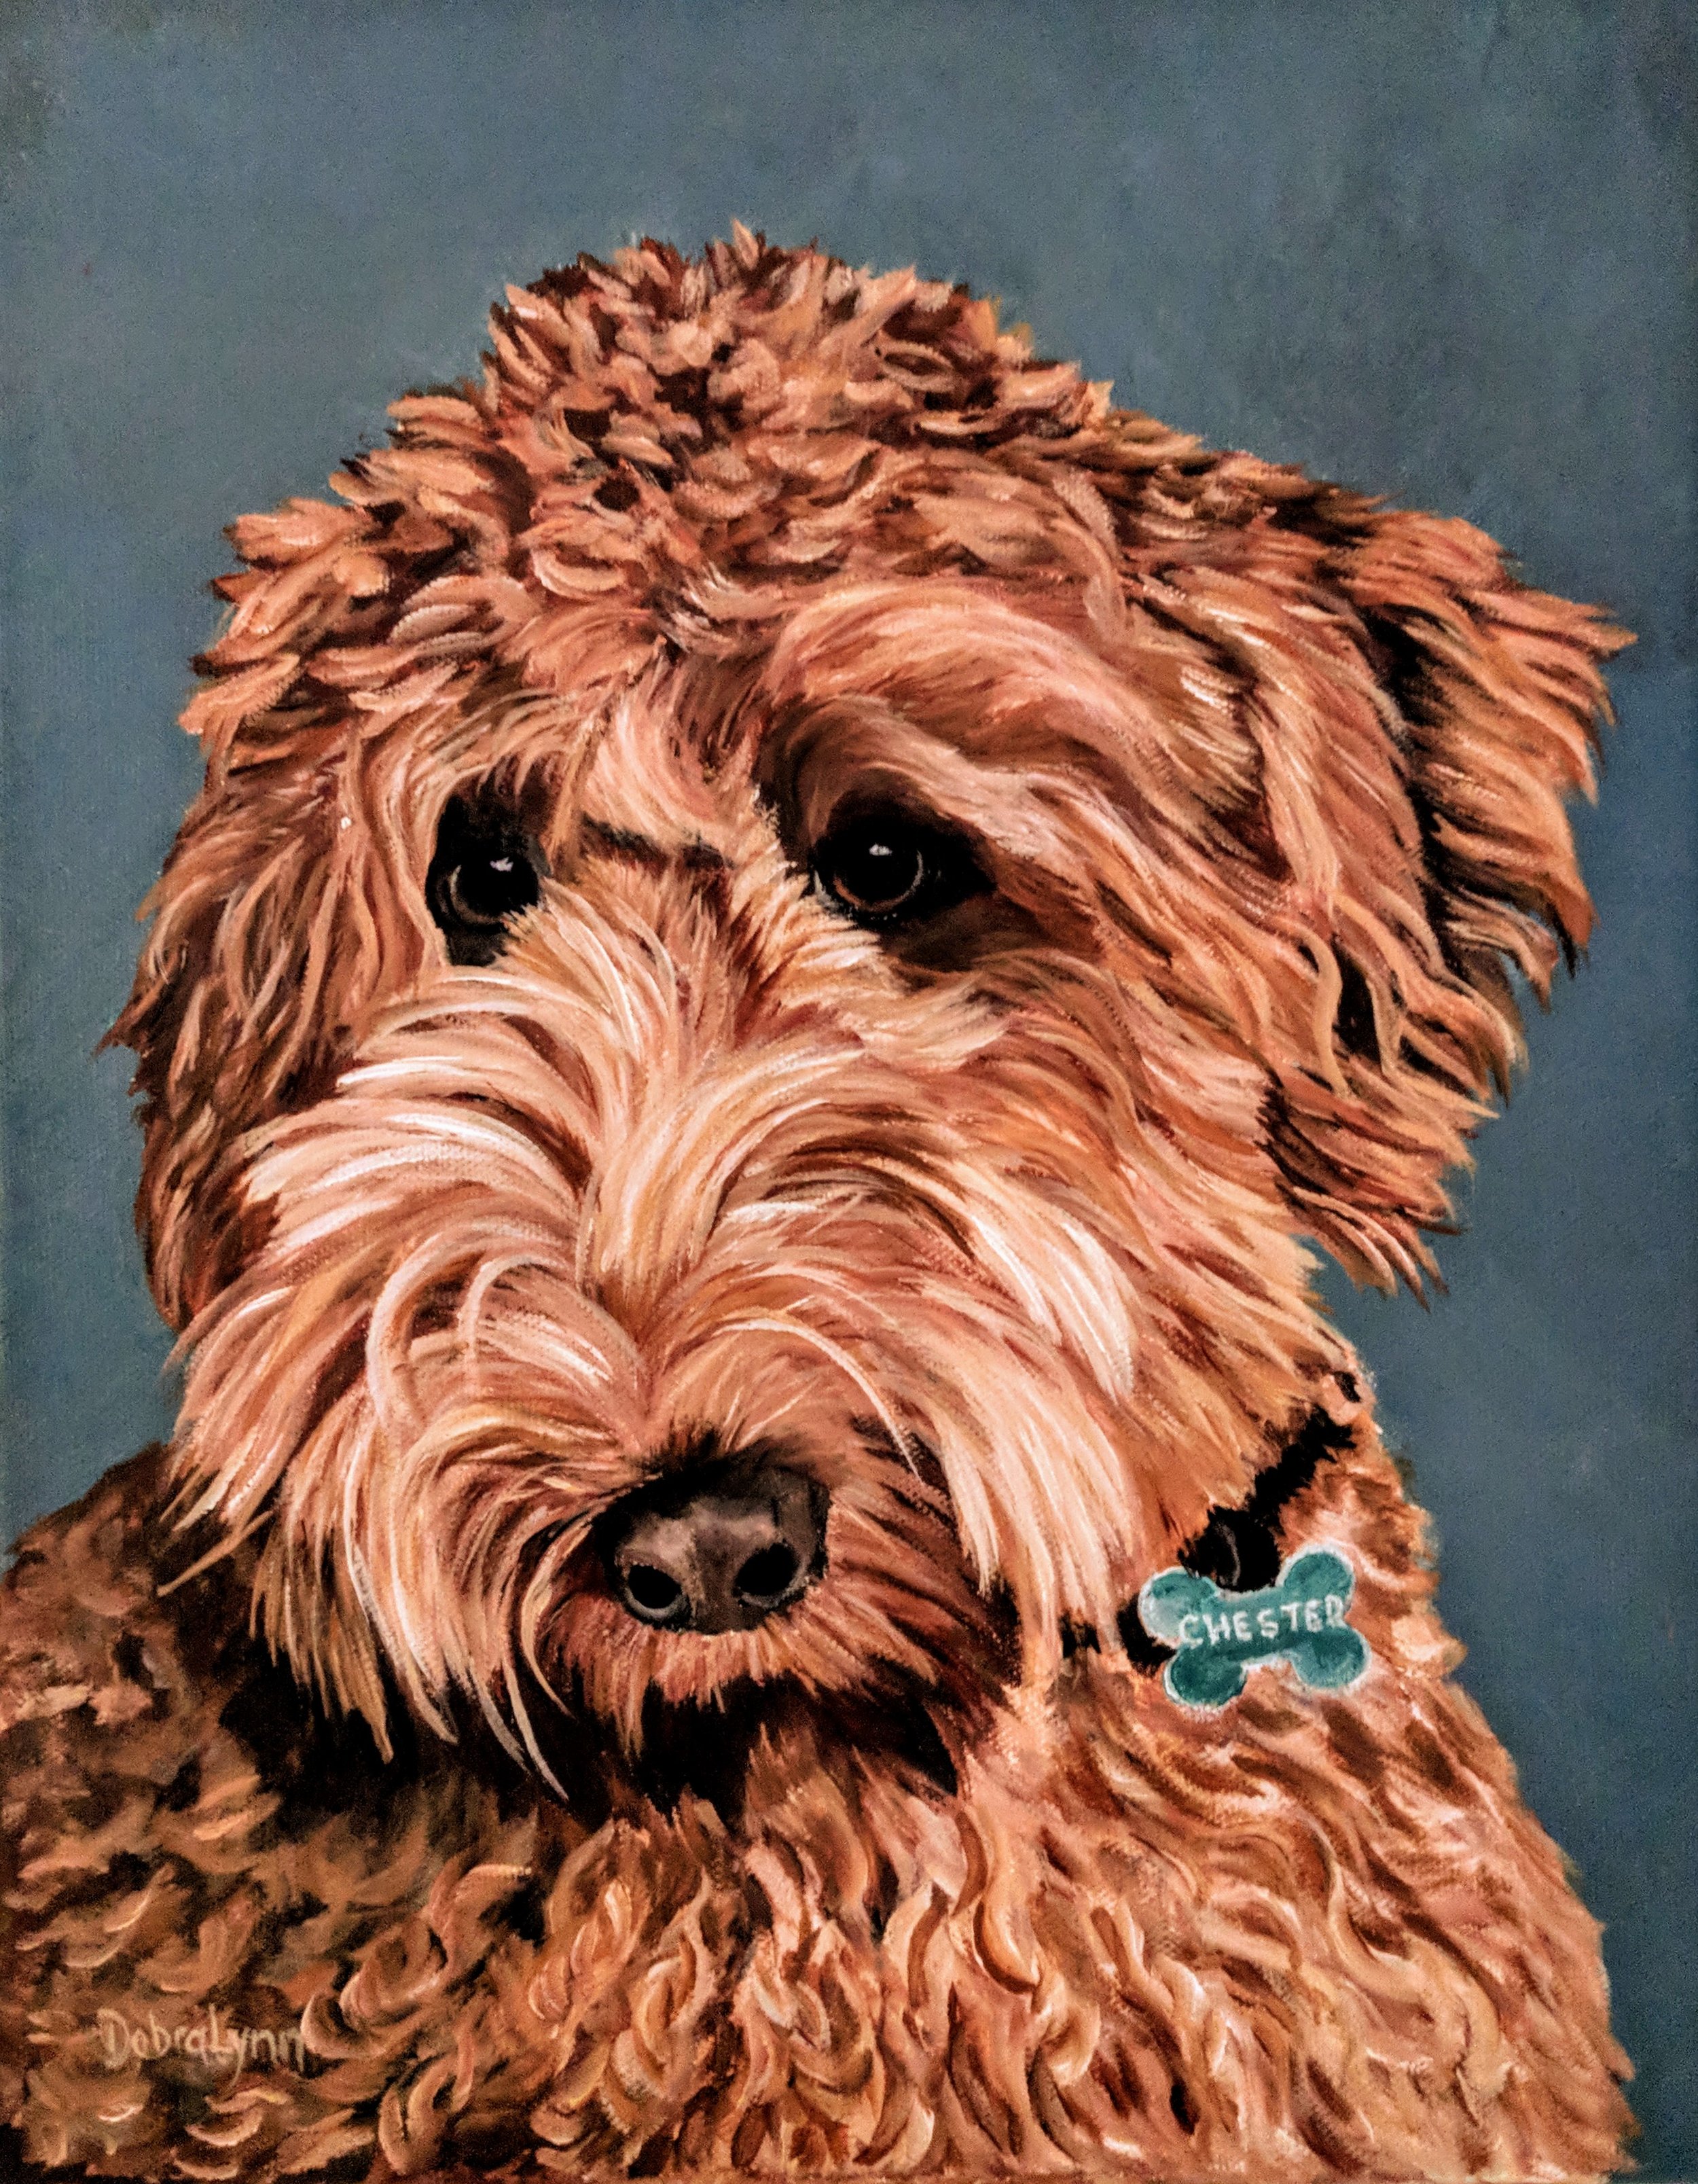 Chester.  Goldendoodle